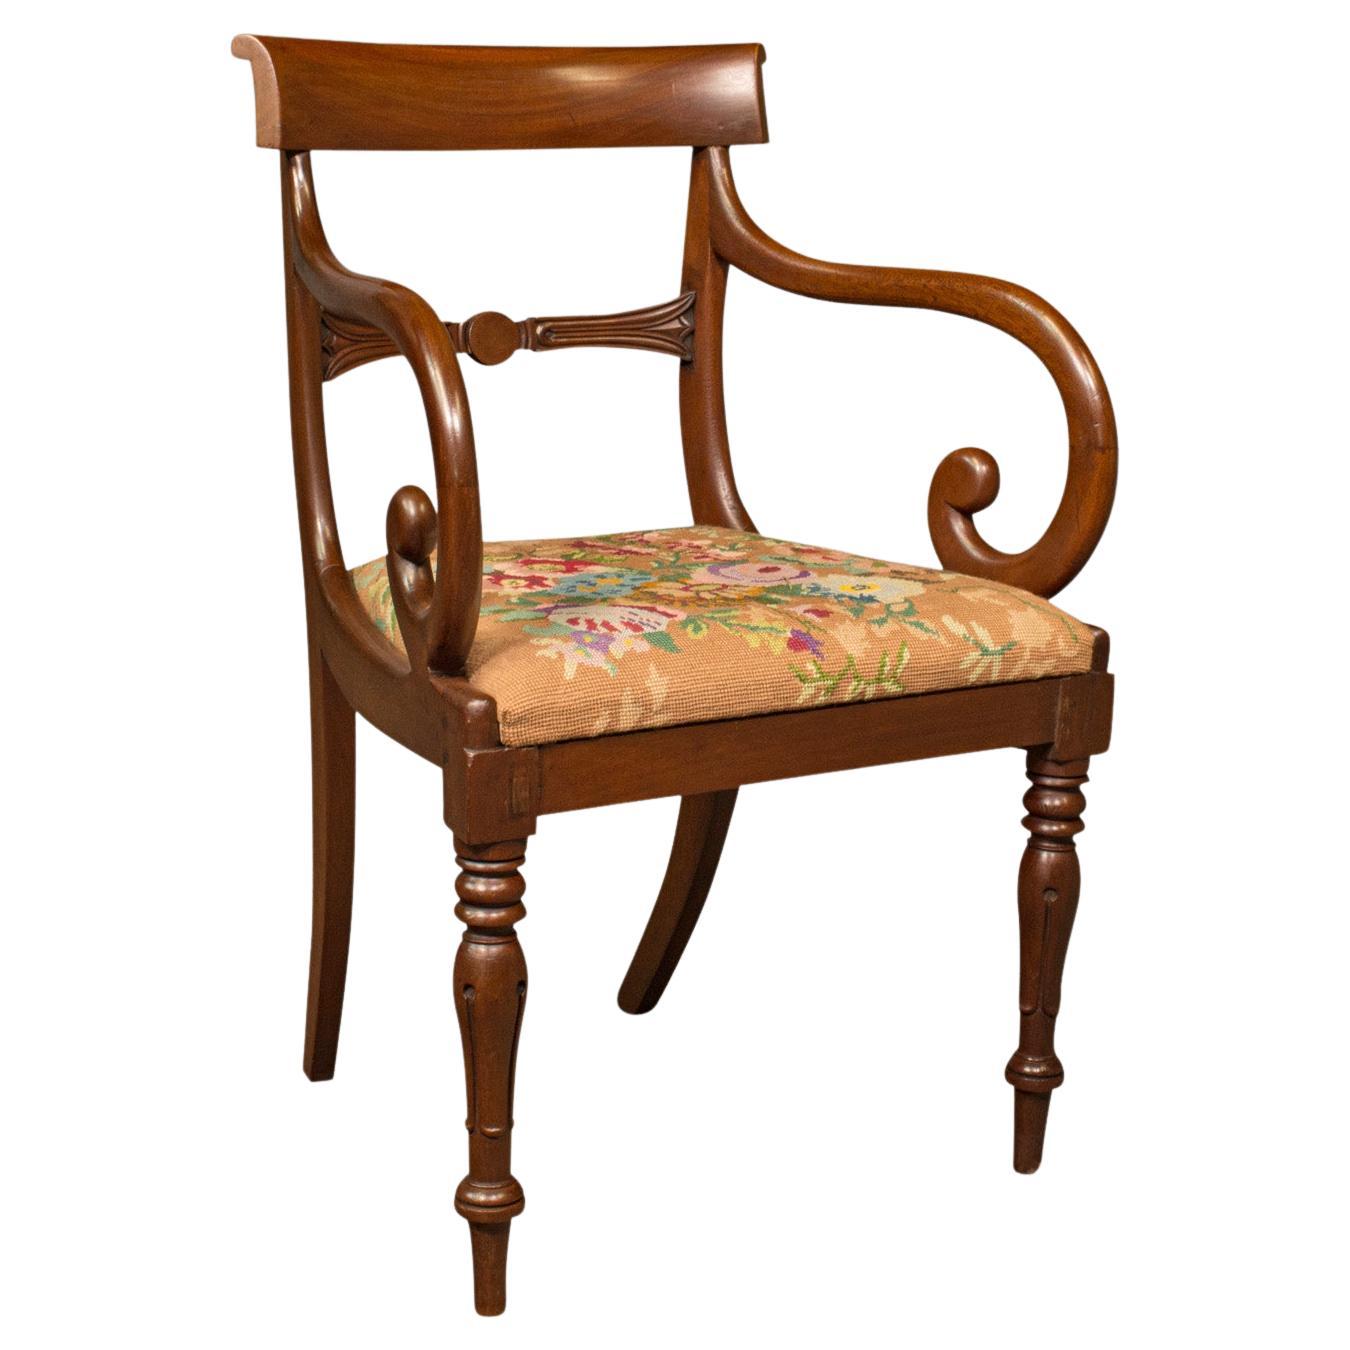 Antique Scroll Arm Chair, English, Armchair, Desk, Needlepoint, Regency, C.1830 For Sale